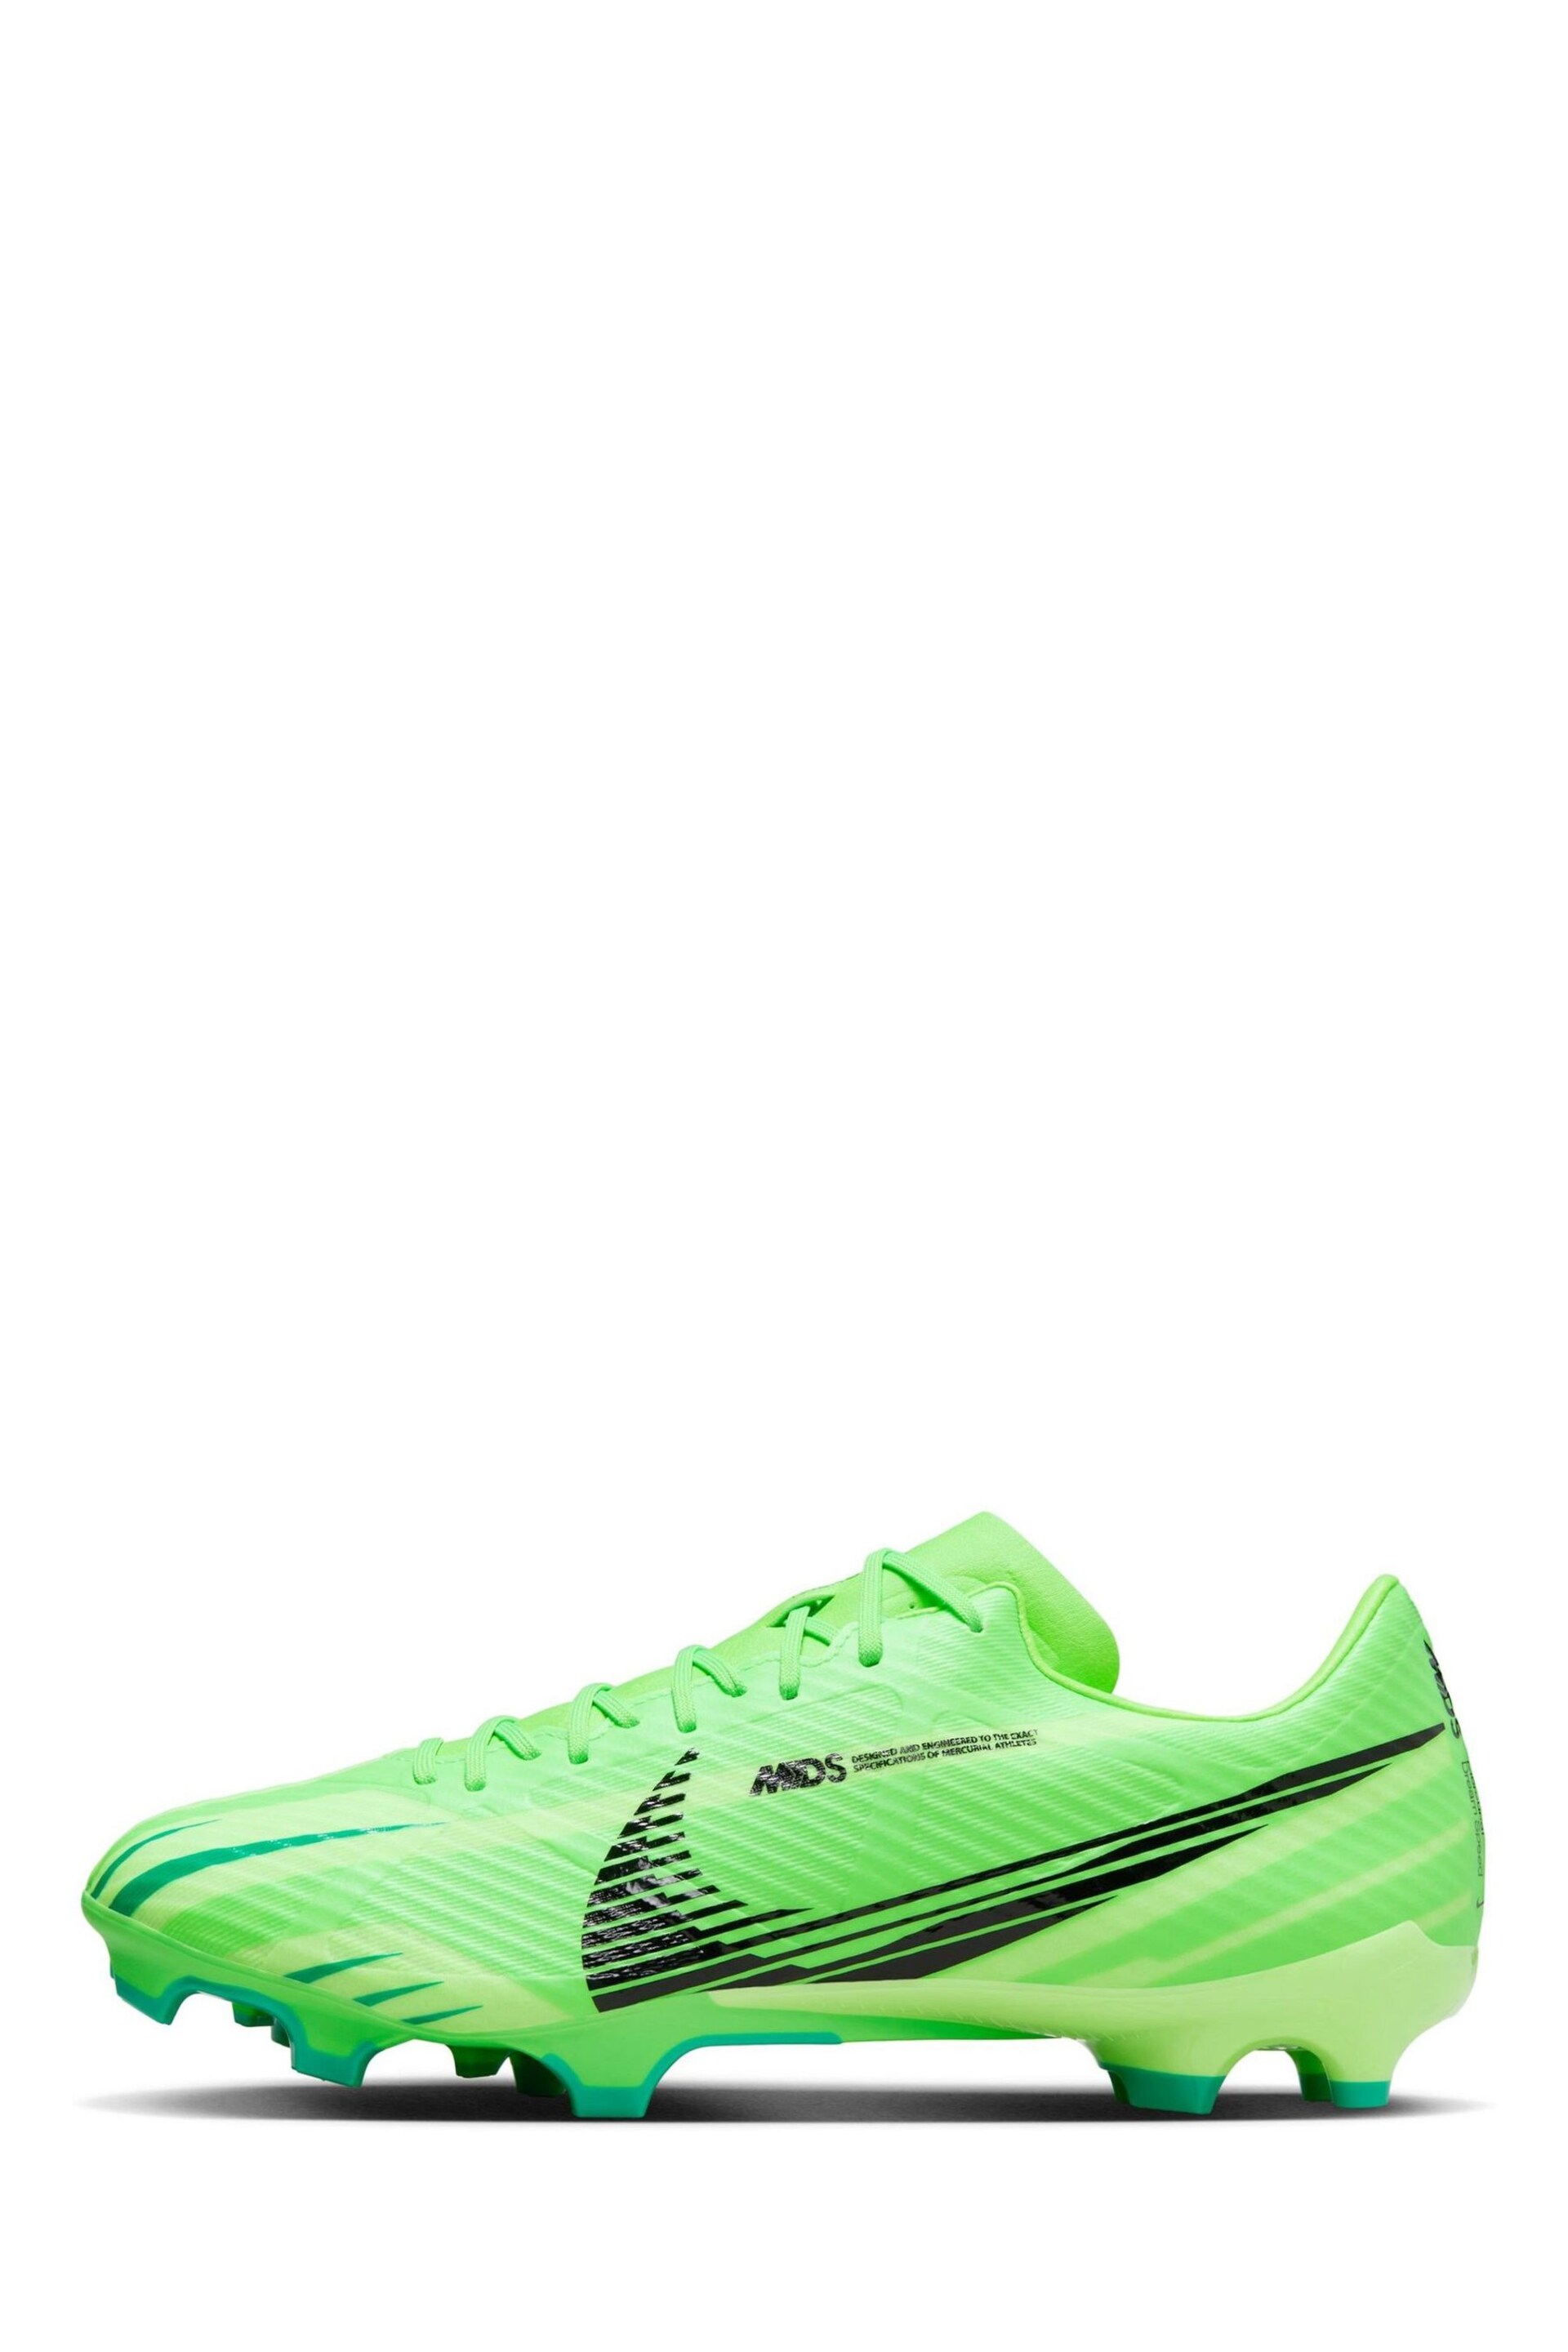 Nike Barely Green/Gold Zoom Vapor 15 Academy Multi Ground Football Boots - Image 2 of 11